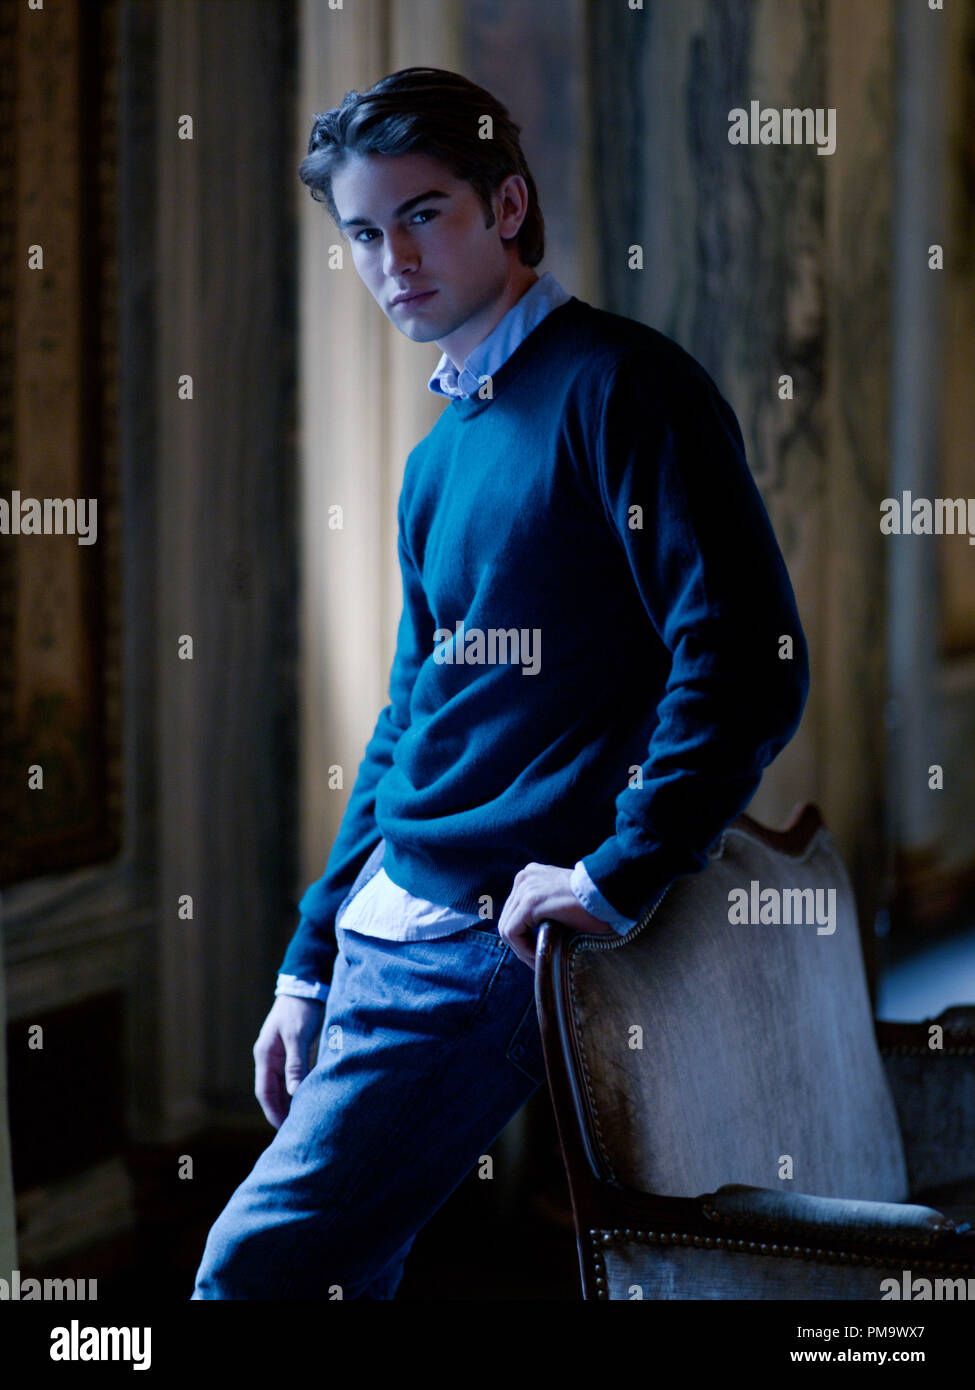 Gossip Girl Pictured: Chace Crawford as Nate © 2007 The CW Network, LLC. All Rights Reserved. Stock Photo